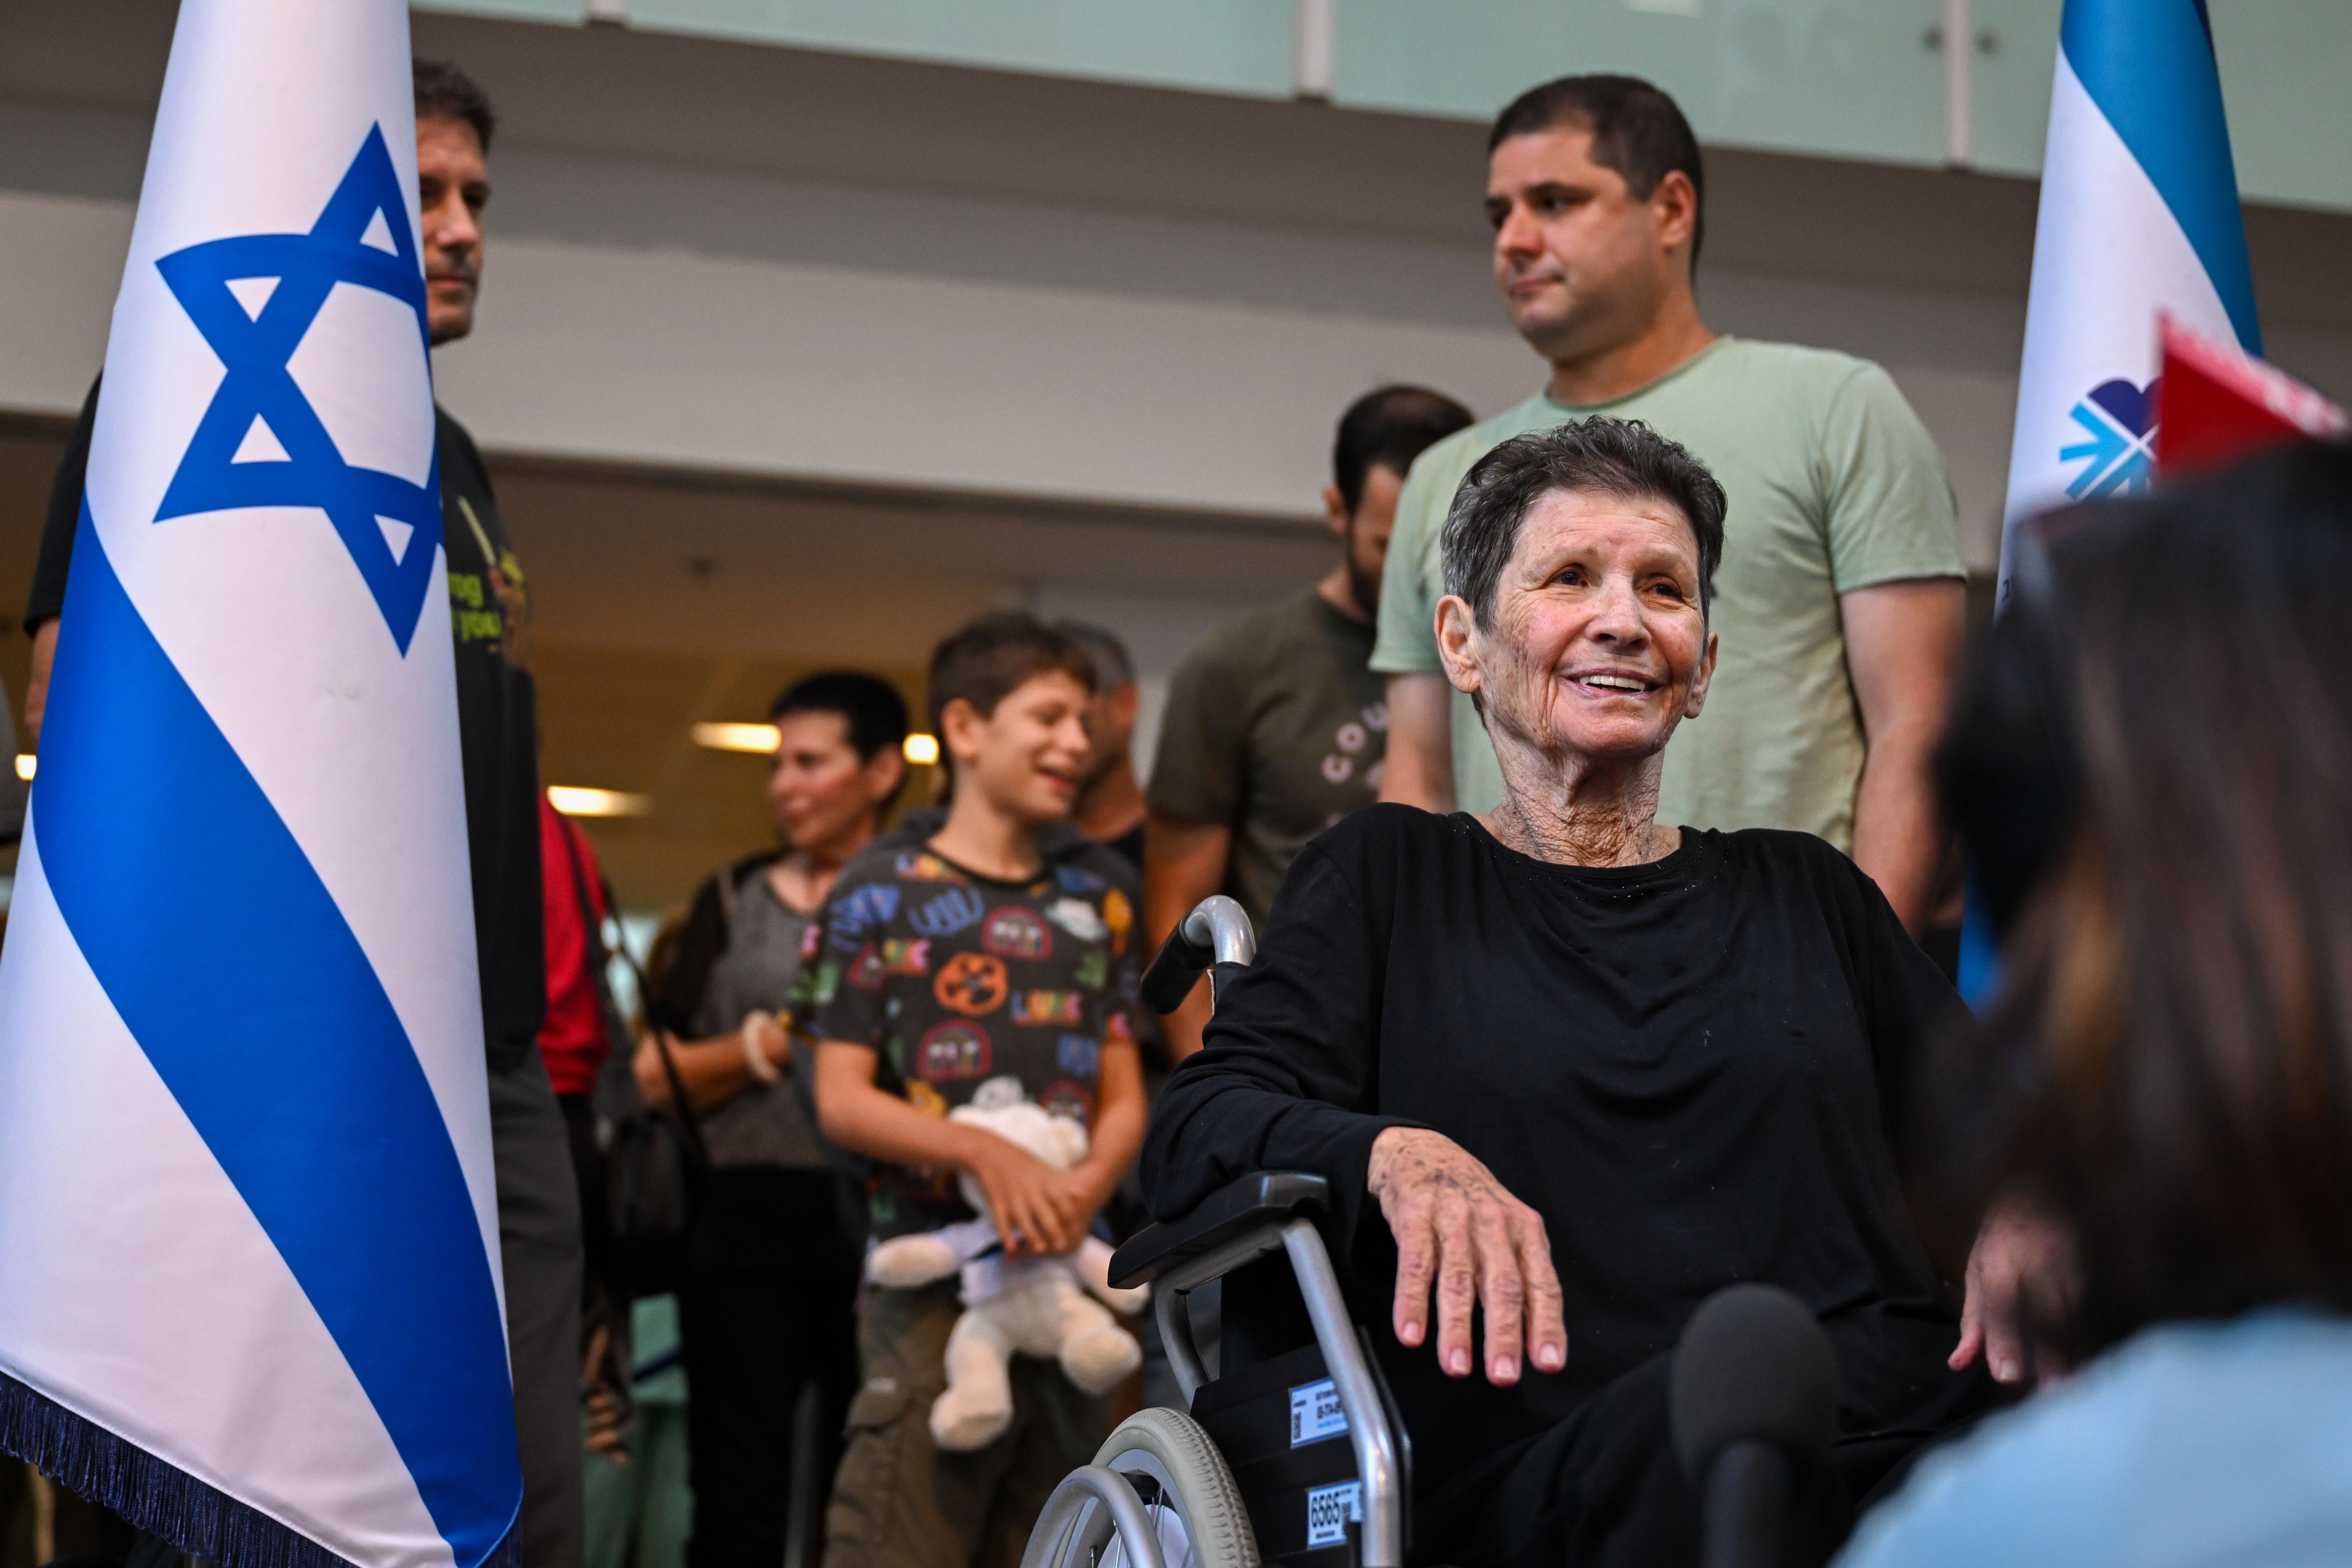 A woman in a wheelchair smiles up at unseen people in the foreground. 